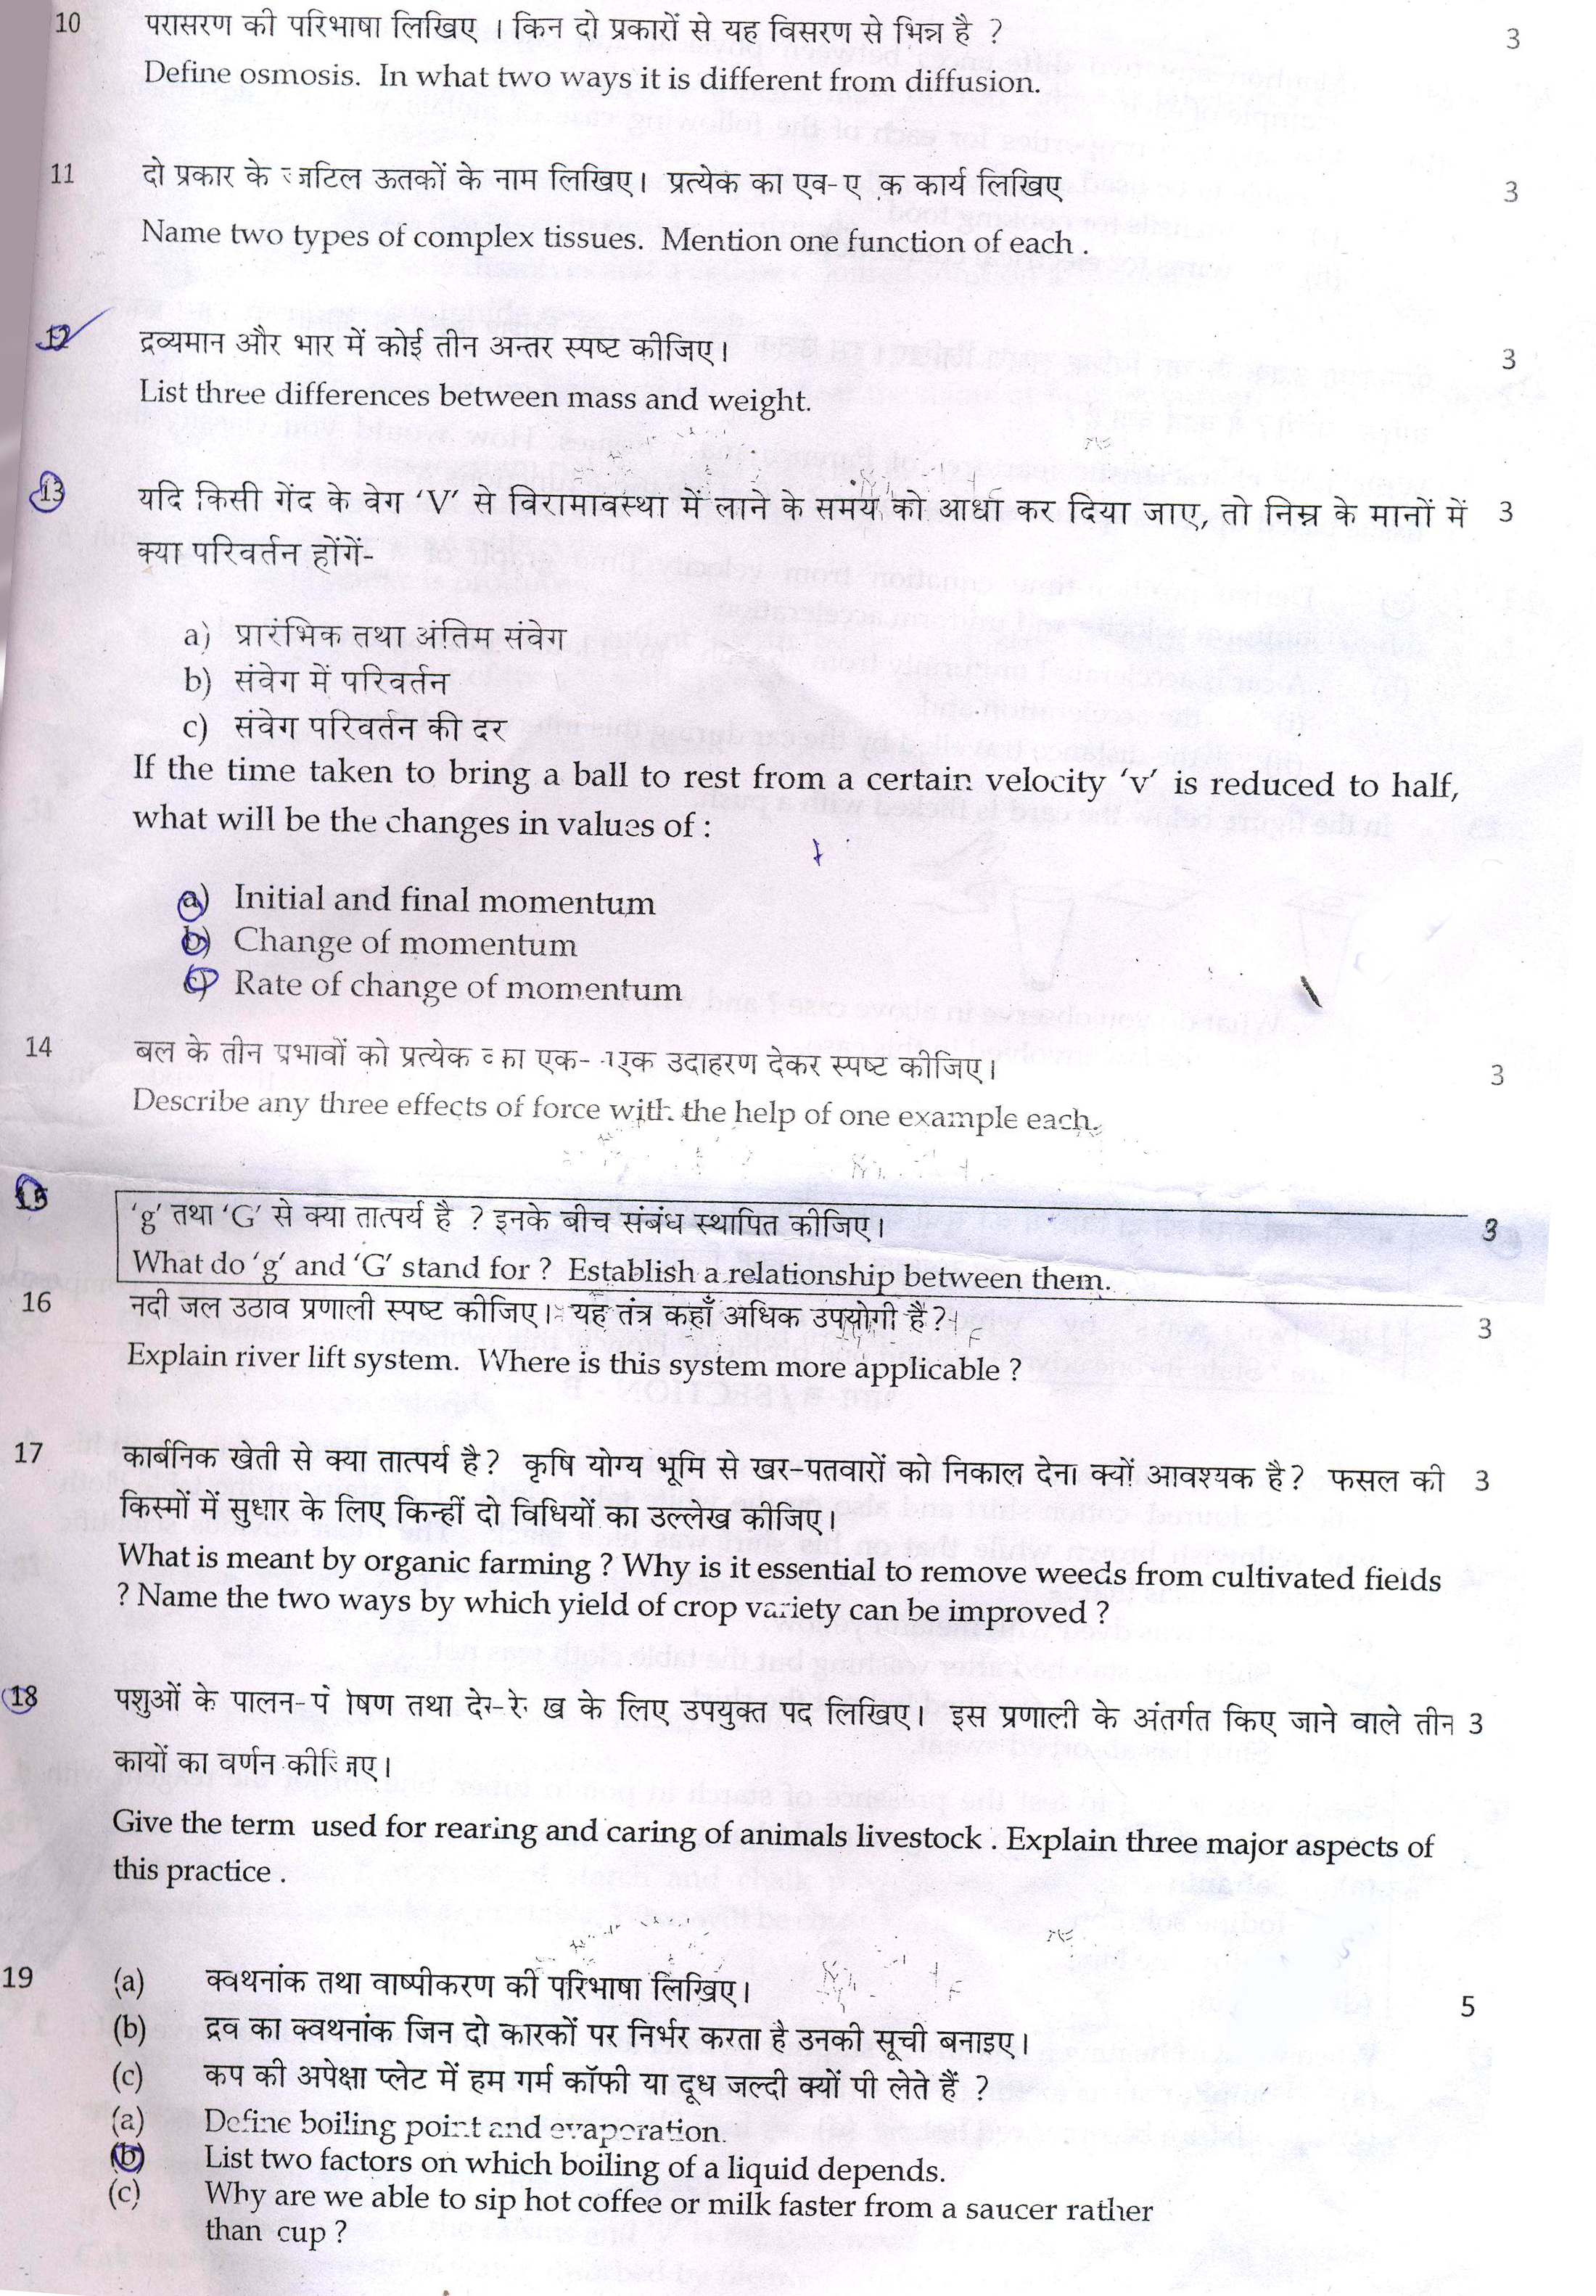 CBSE 2013 - 2014 Class 09 SA1 Question Paper - Science